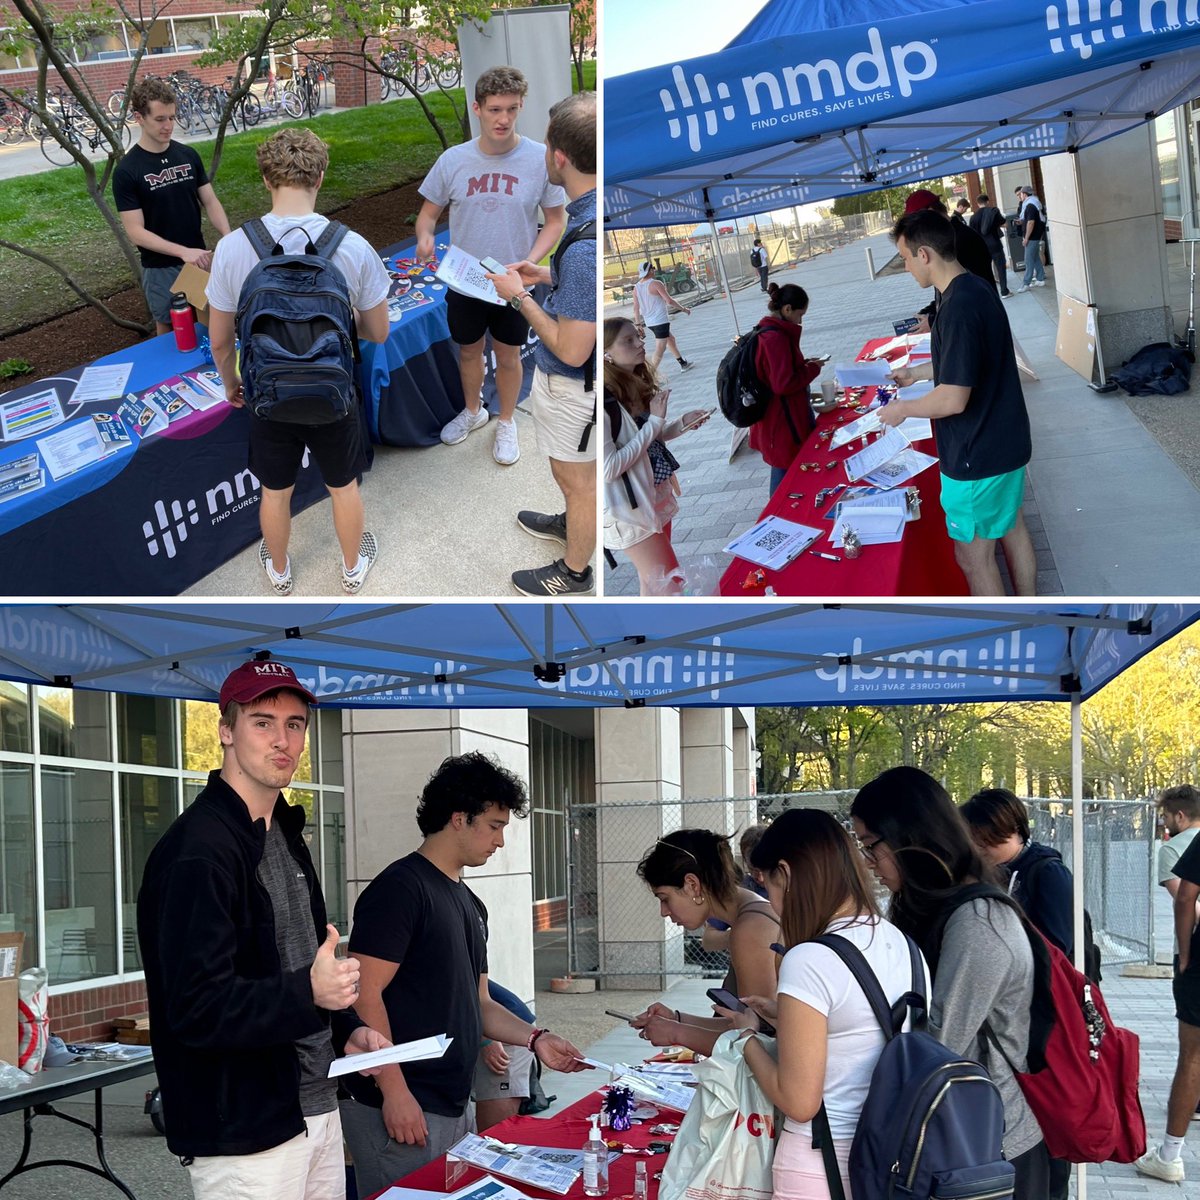 Big thanks to the 125 people that signed up at our @nmdp bone marrow donor registry booths this afternoon! MIT Football is always proud to partner with @BeTheMatchNE to get more people registered and hopefully #savealife. Learn more: shorturl.at/kvxBV